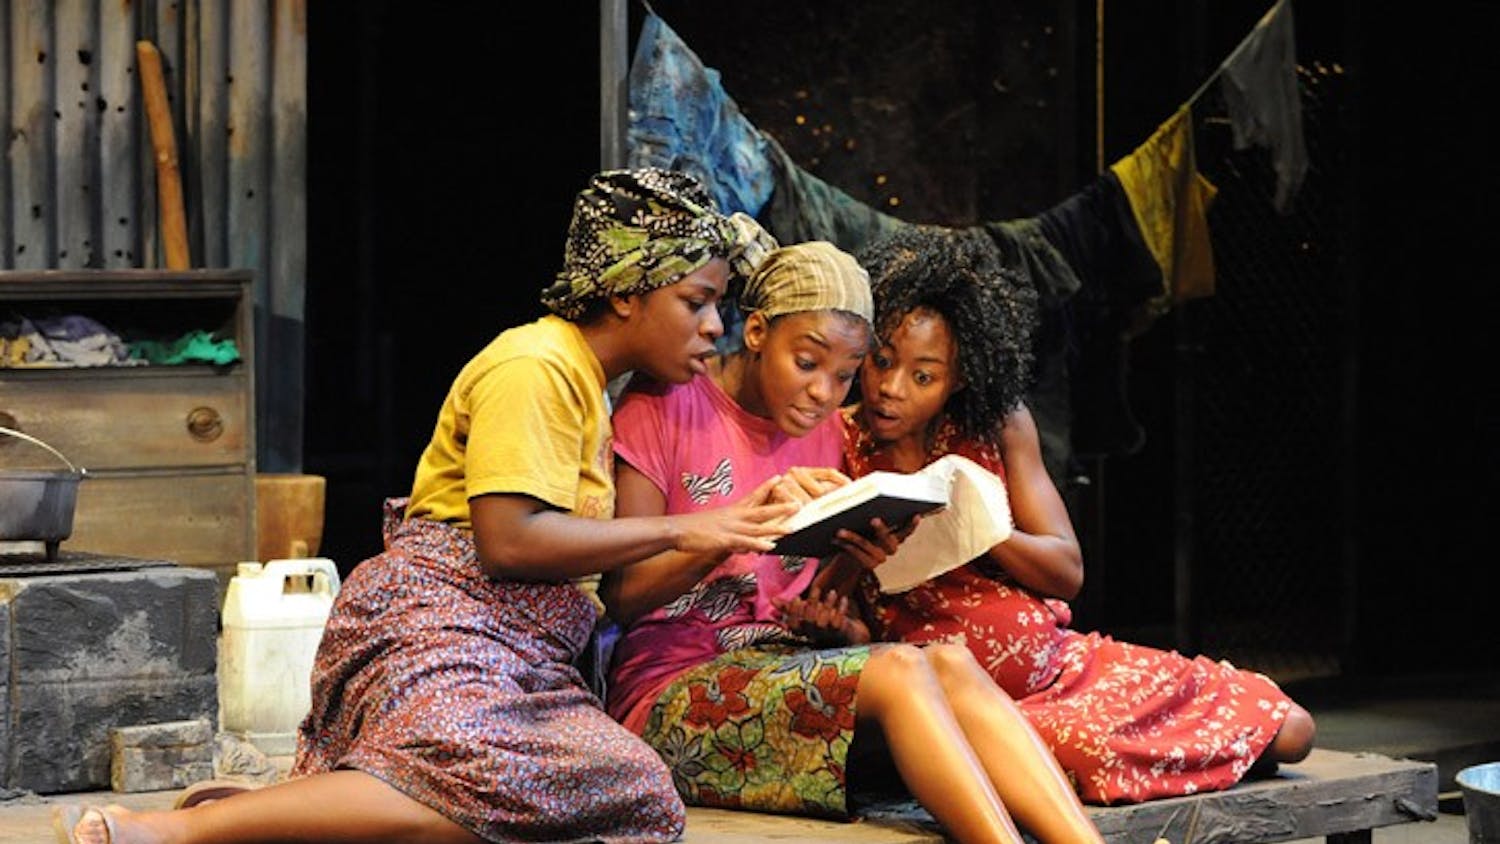 COMPOUND LIVING â€” Three wives of an army officer are the main focus of Woolly Mammoth Theatre Companyâ€™s newest production, â€œEclipsed.â€ The play will run in Chinatown until Sept. 27.